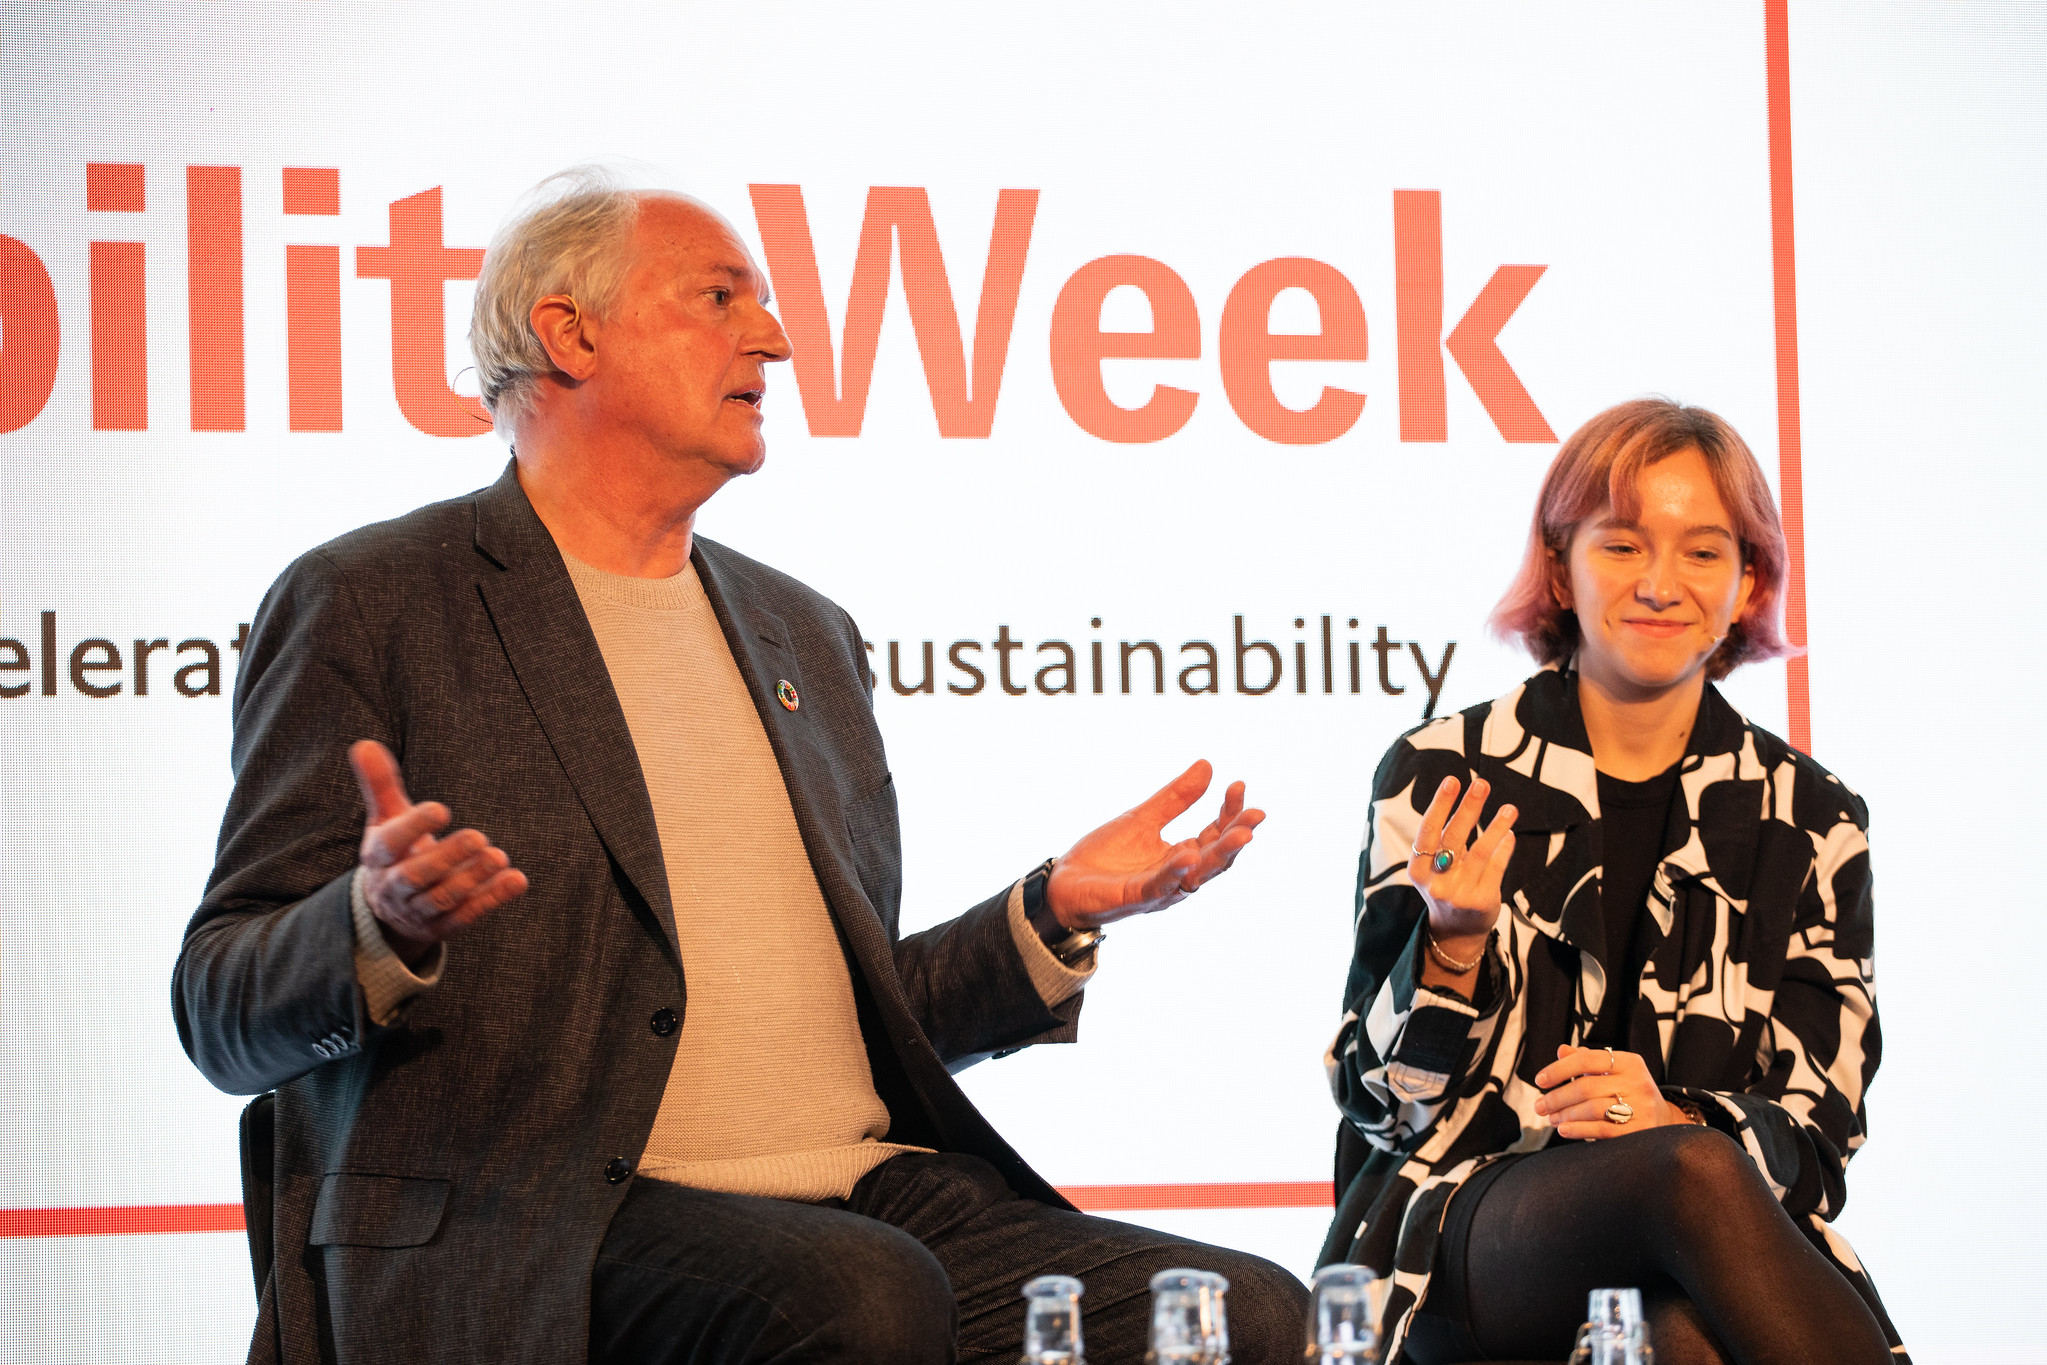 Paul Polman and Clover Hogan speaking at the Panel on Closing the ambition gap